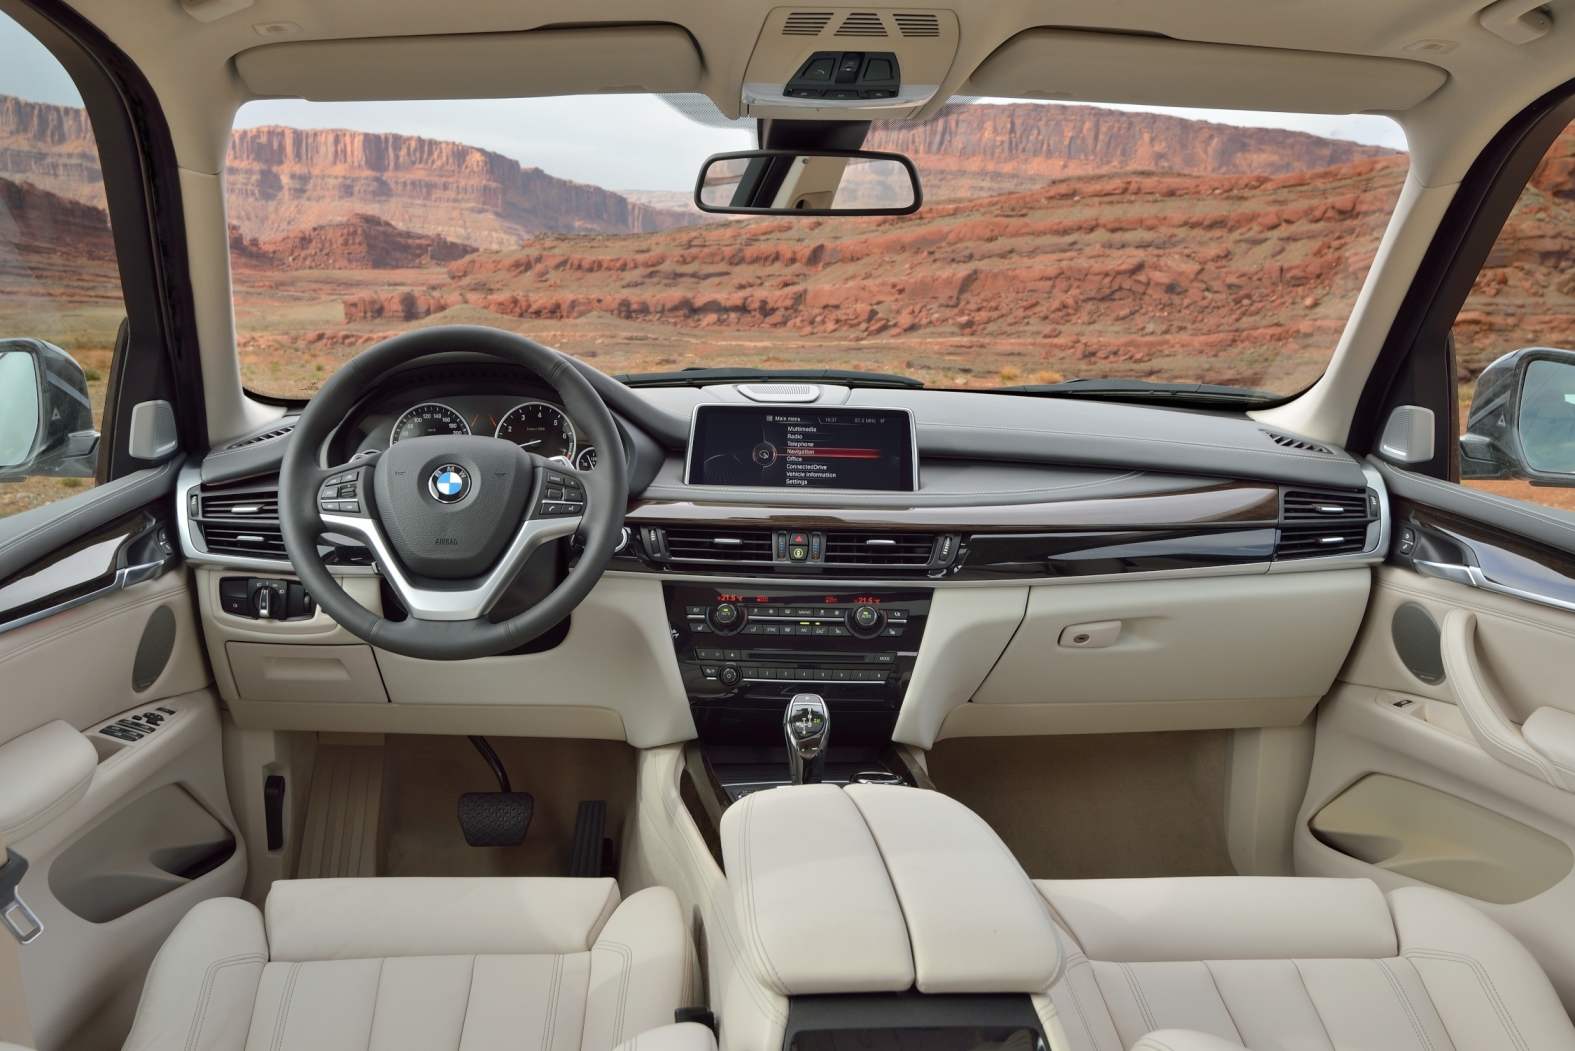 The front part of the interior of the BMW X5.